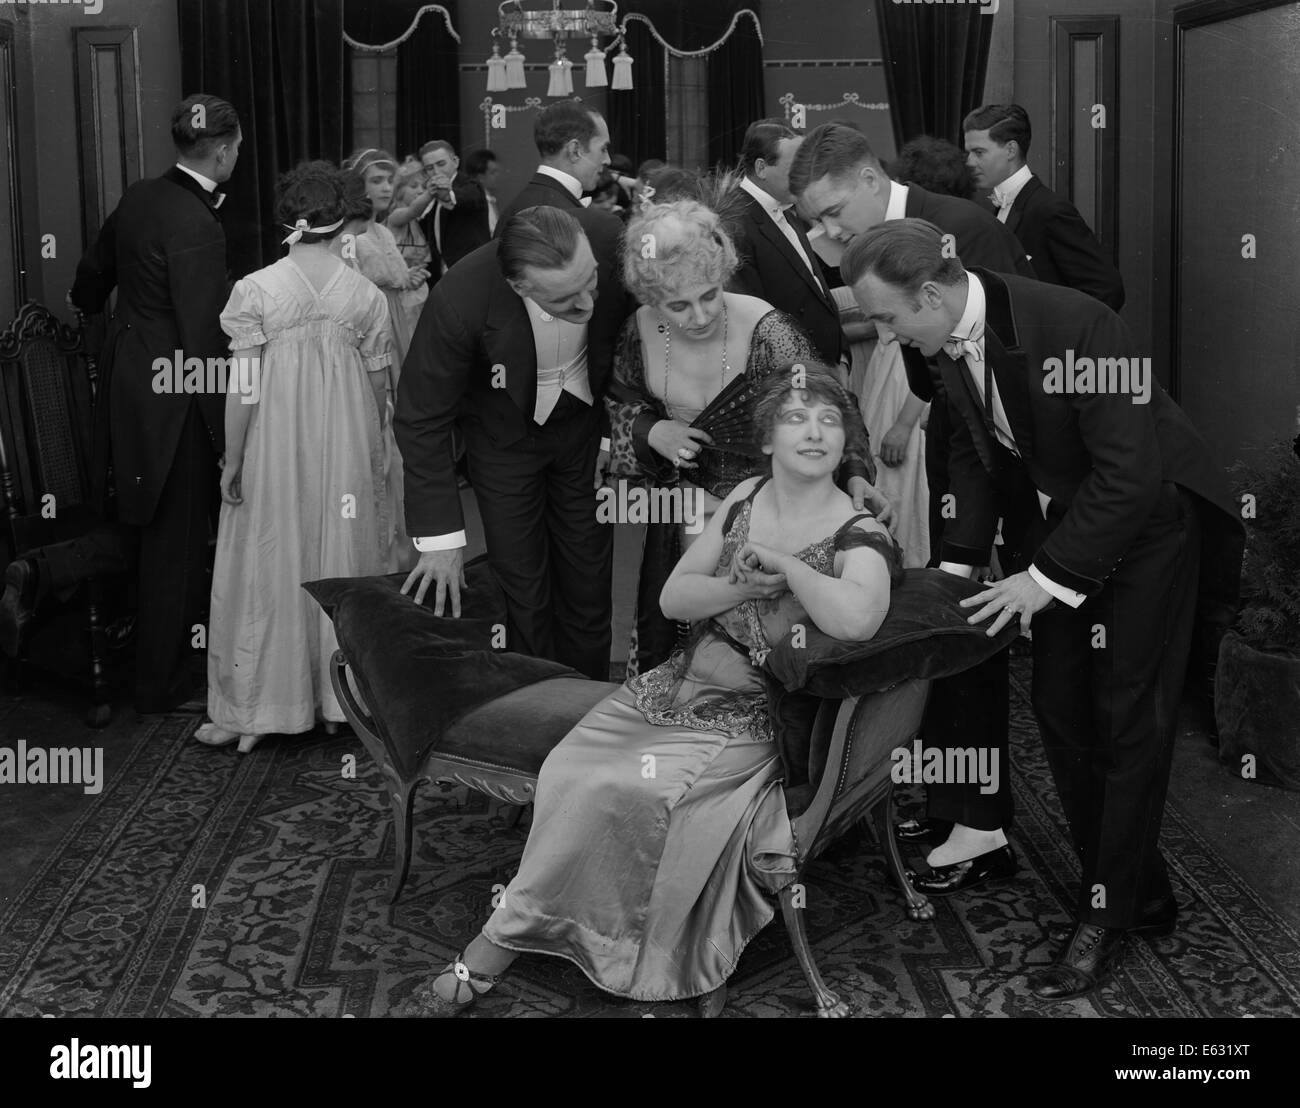 1900s 1910s 1920s SMALL GROUP ATTENDING TO SEATED WOMAN AMIDST FORMAL SOCIETY PARTY SILENT MOVIE STILL Stock Photo